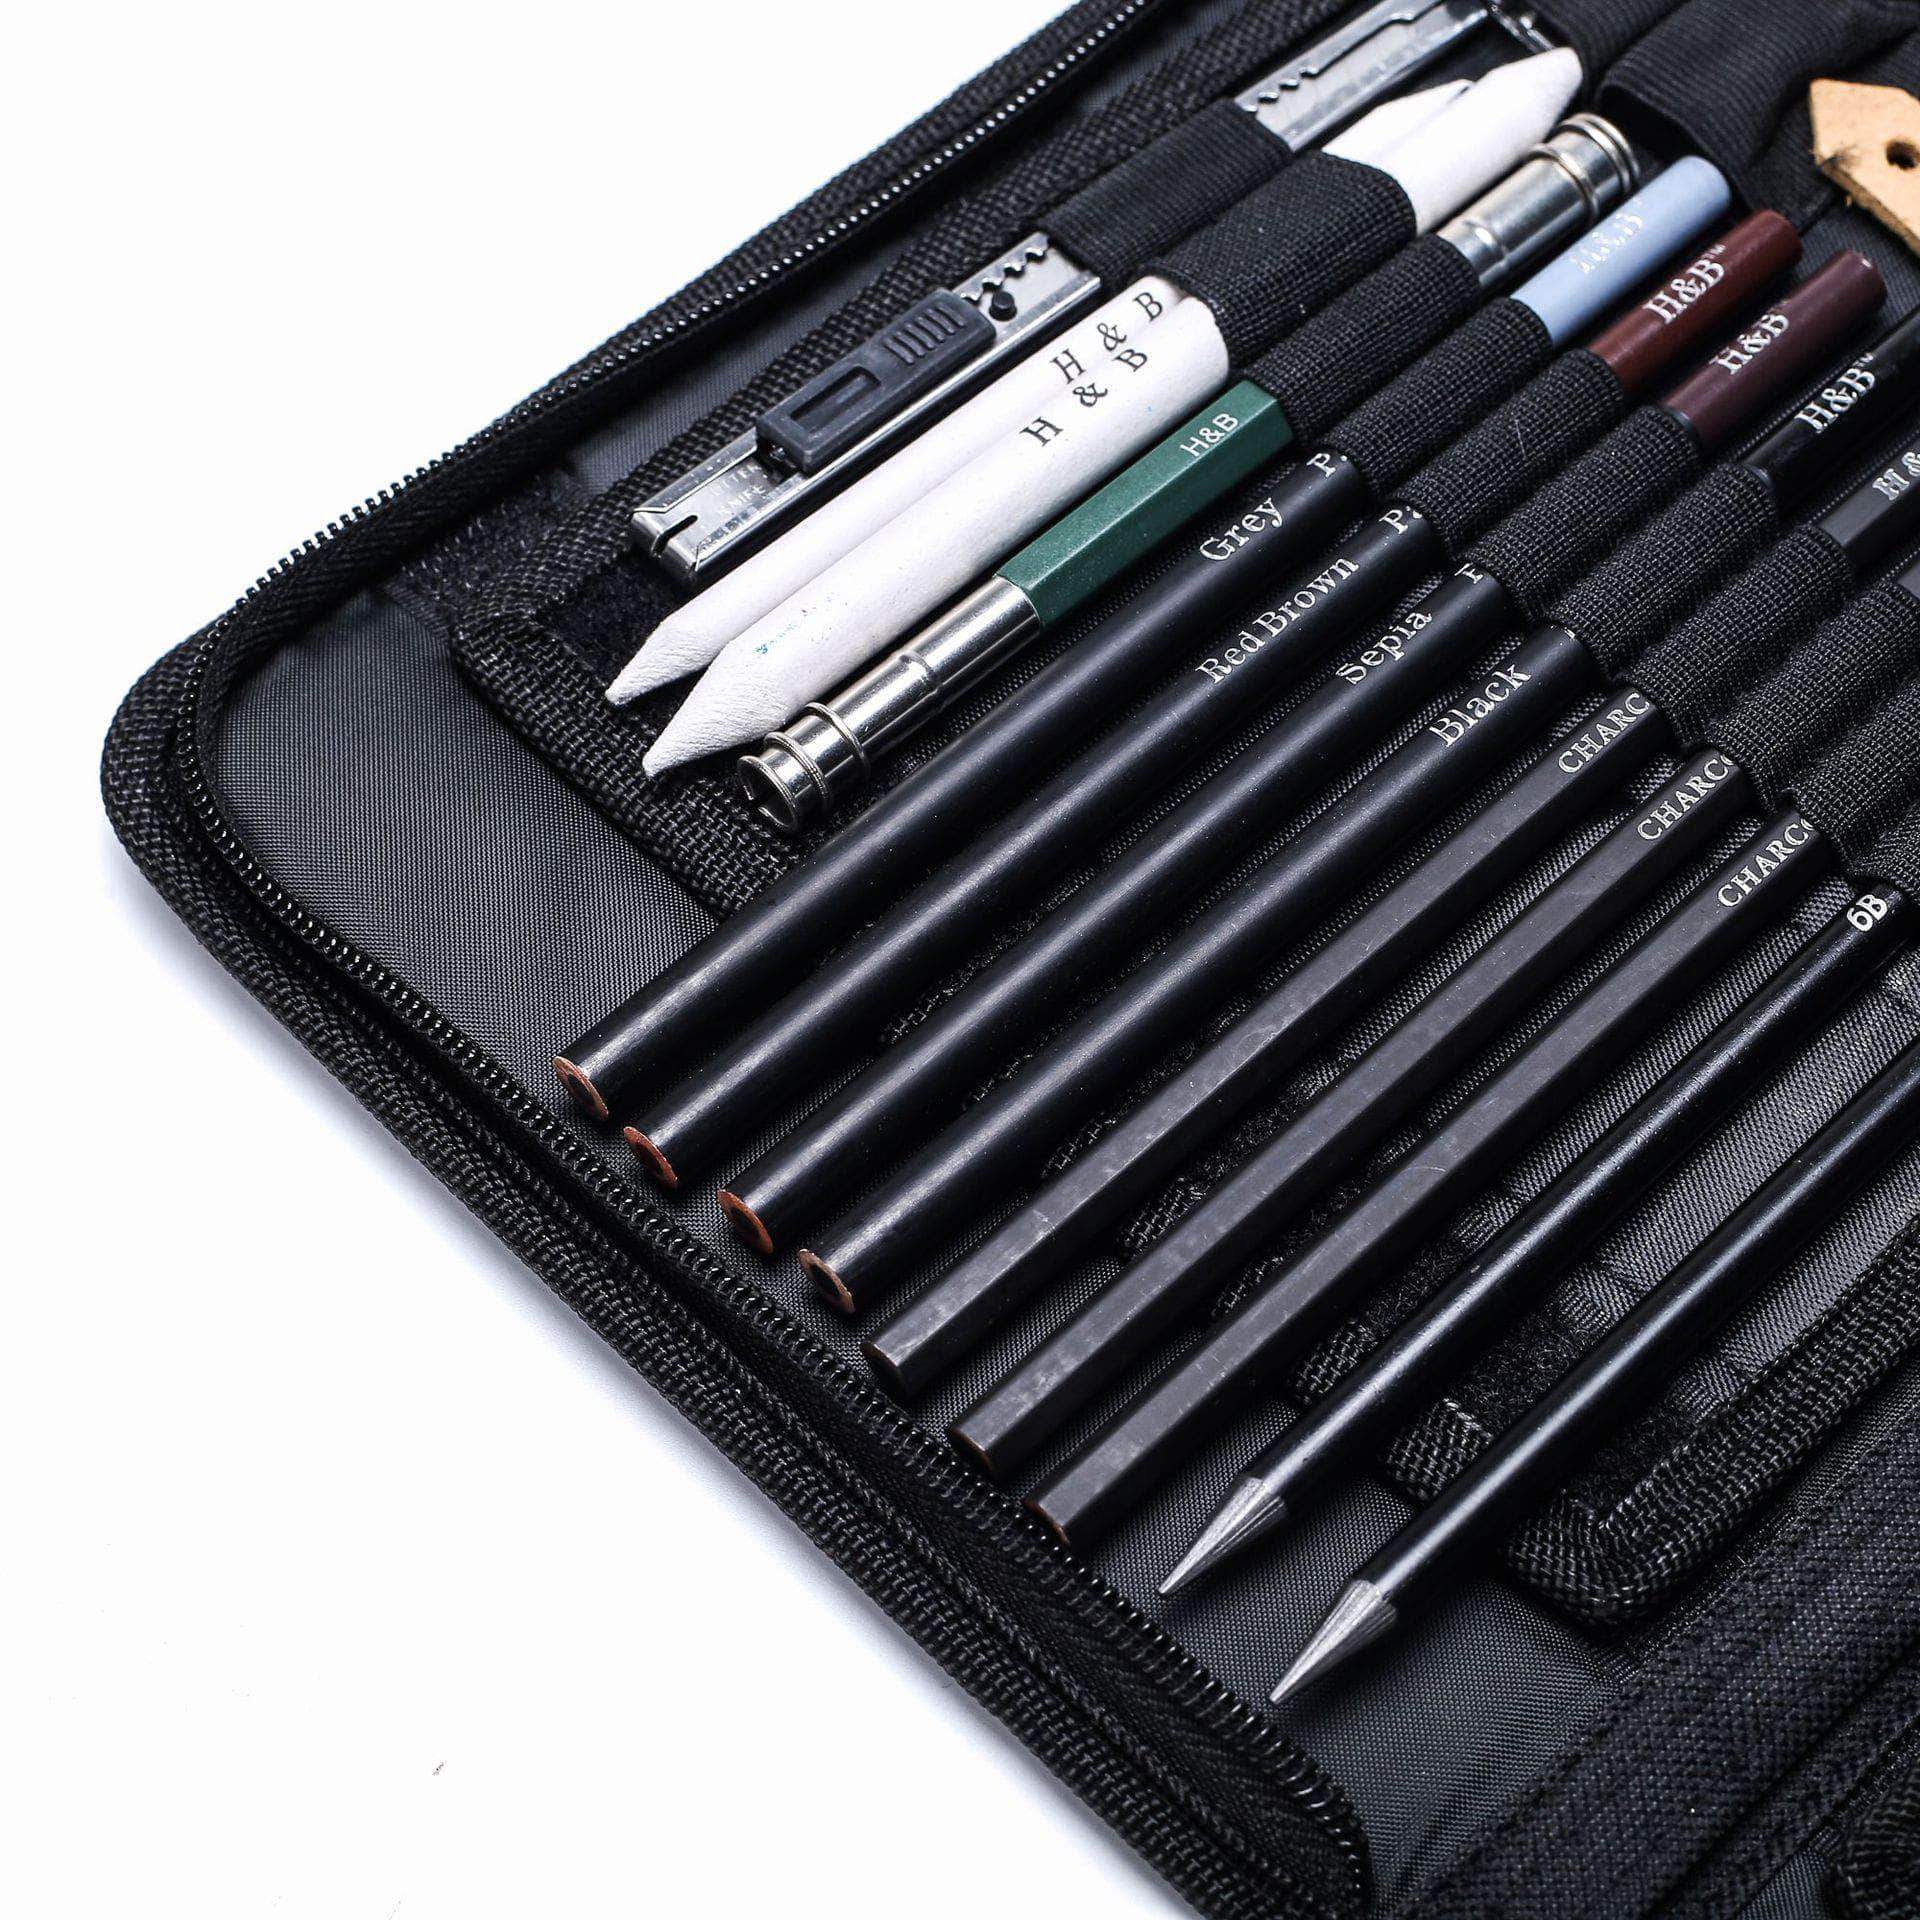 48-piece Sketching Pencil Drawing Tool Set Ideal Set For Artists